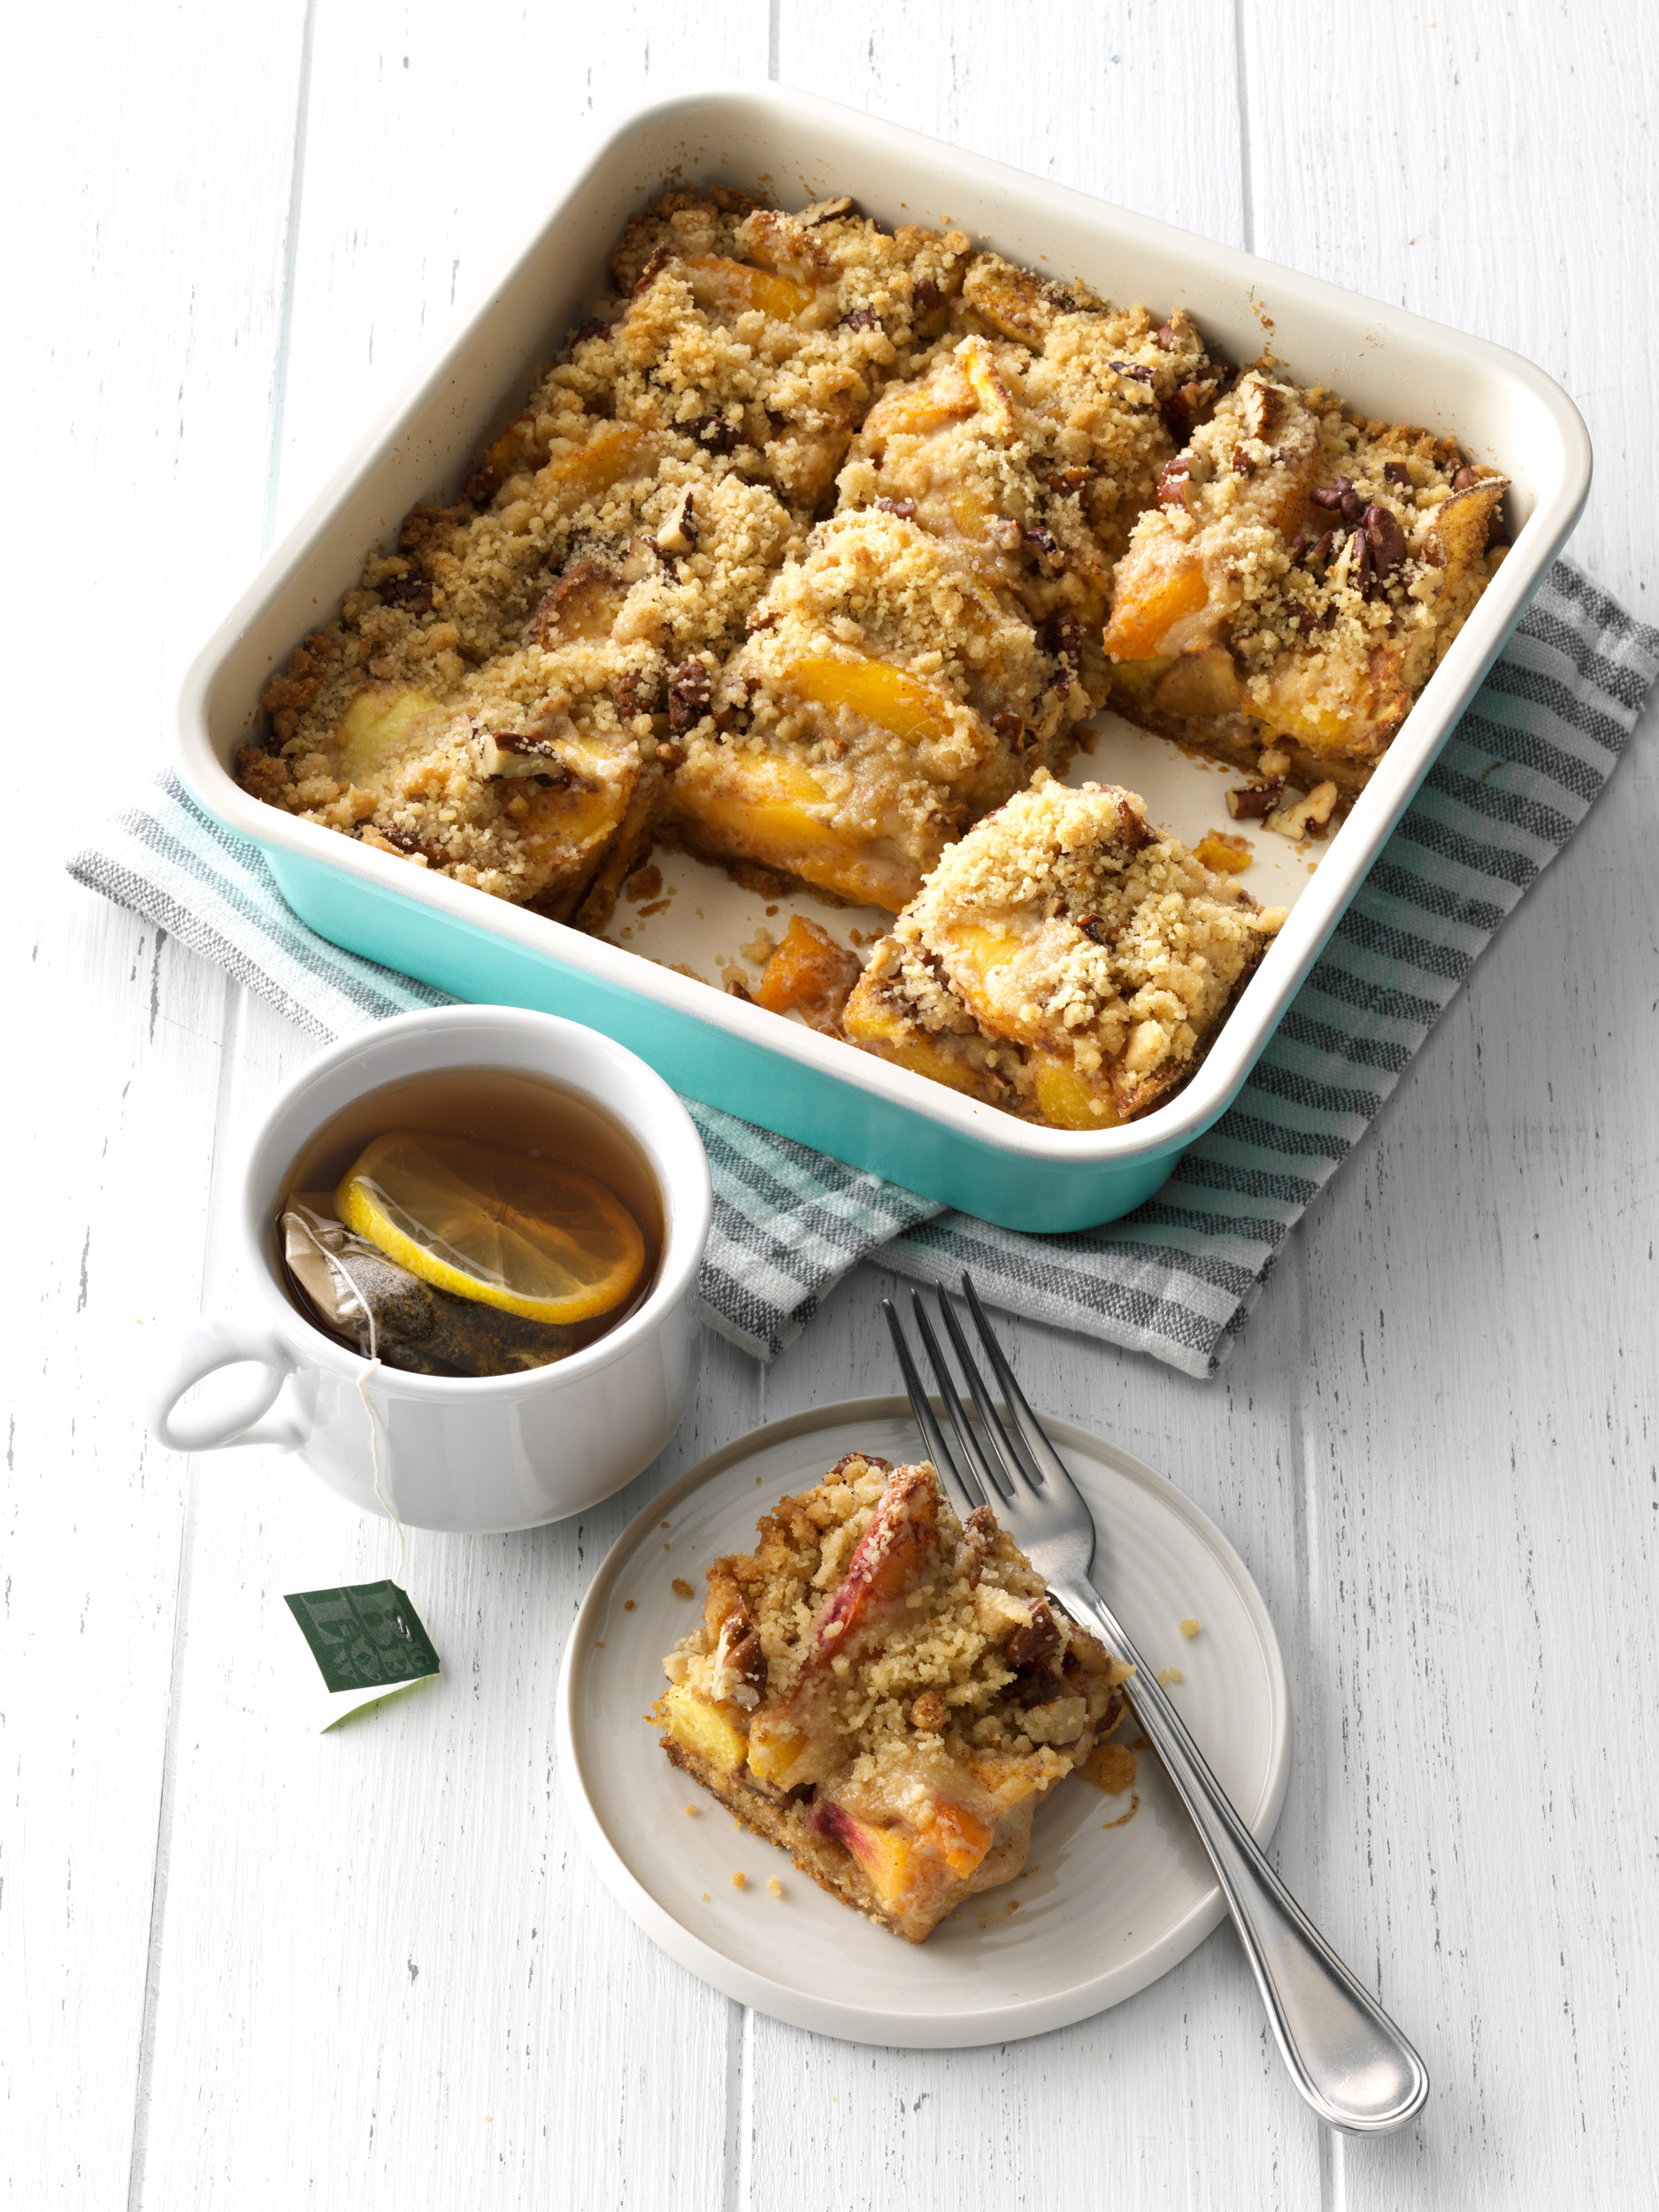 Peach Crumble Bars photo by Chris Kessler Photography.  Chris Kessler is a freelance Photographer based in Milwaukee Wisconsin. Specializing in Food photography and portraiture.